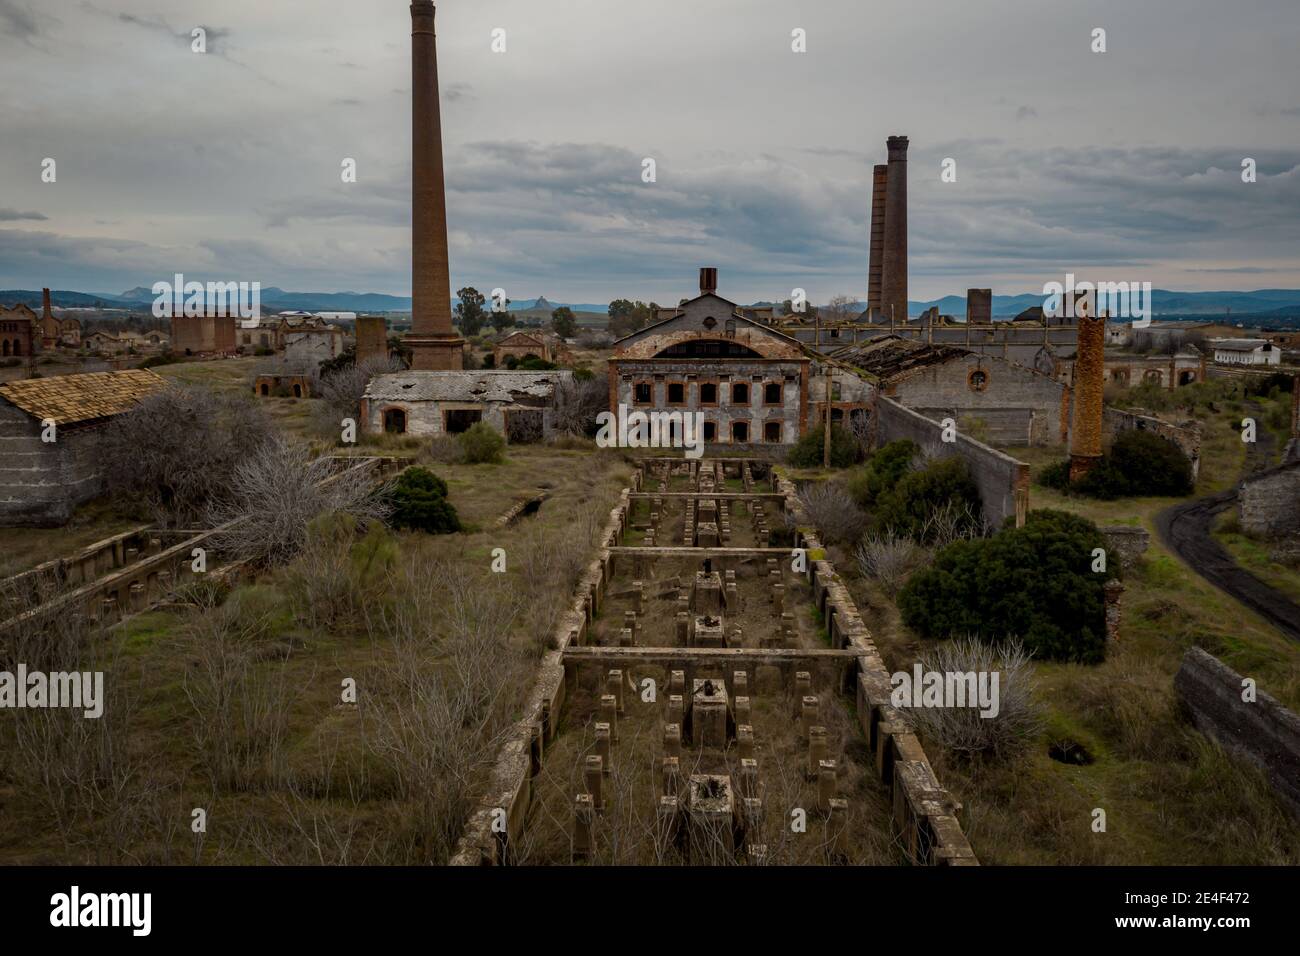 Aerial view of the Abandoned former mining operations peñarroya-pueblonuevo Spain Abandoned Industry Places Stock Photo